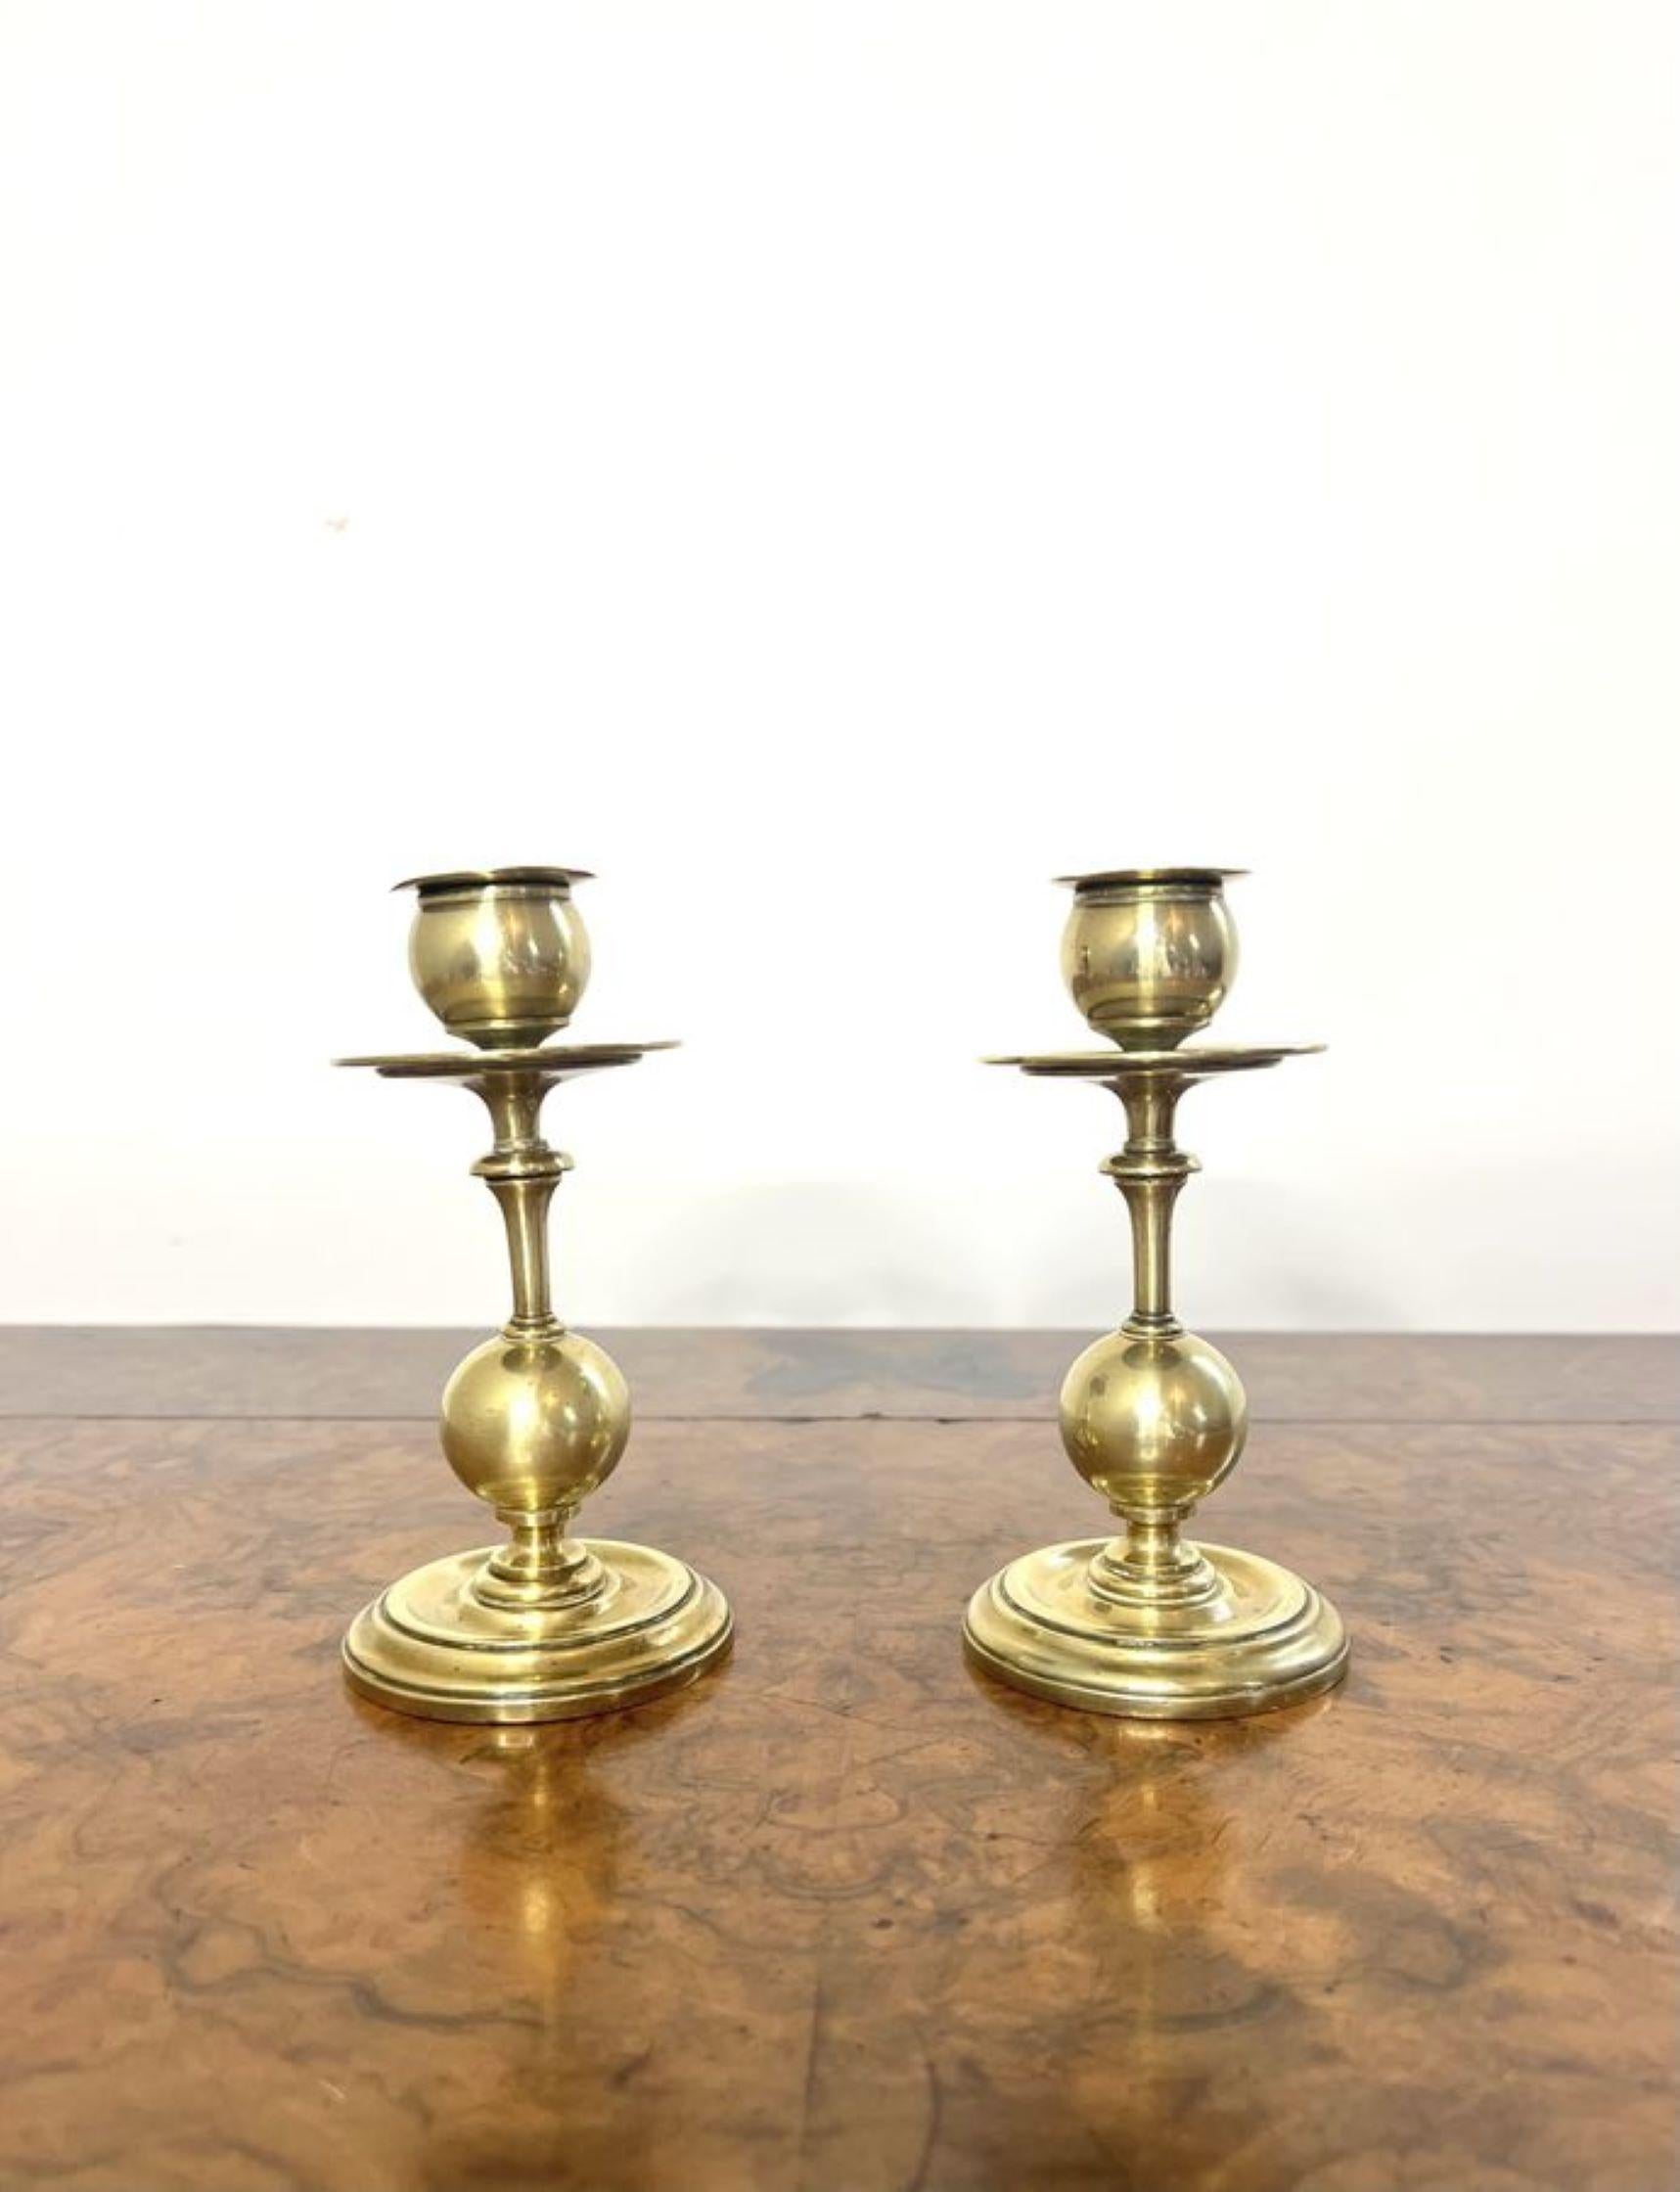 Wonderful pair of arts and crafts brass candlesticks having a wonderful pair of brass candlesticks, with brass drip trays to the top a circular brass ball to the bottom and circular bases.

D. 1910